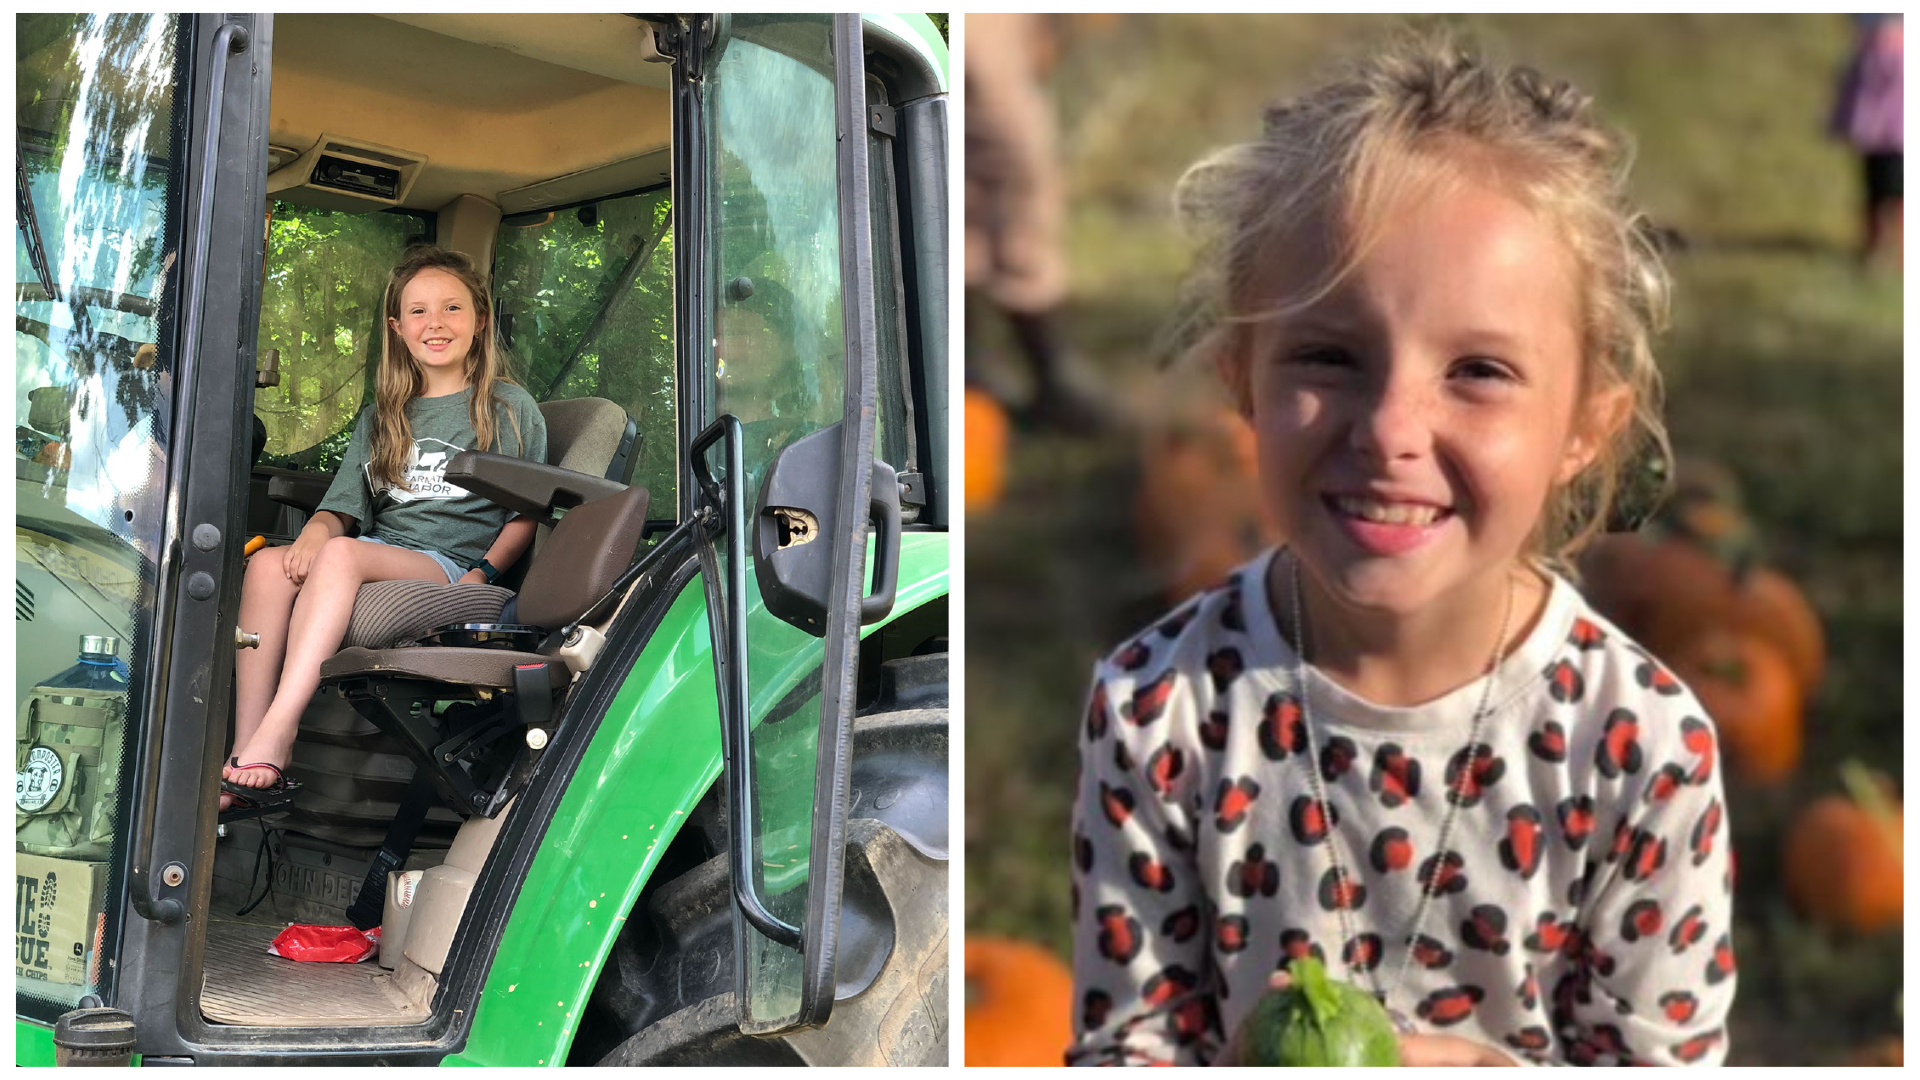 Emma was diagnosed with an extremely rare kidney disease in 2018. With care from one of the best nephrology teams in the country, she’s back to being a kid and has big plans for when she grows up.